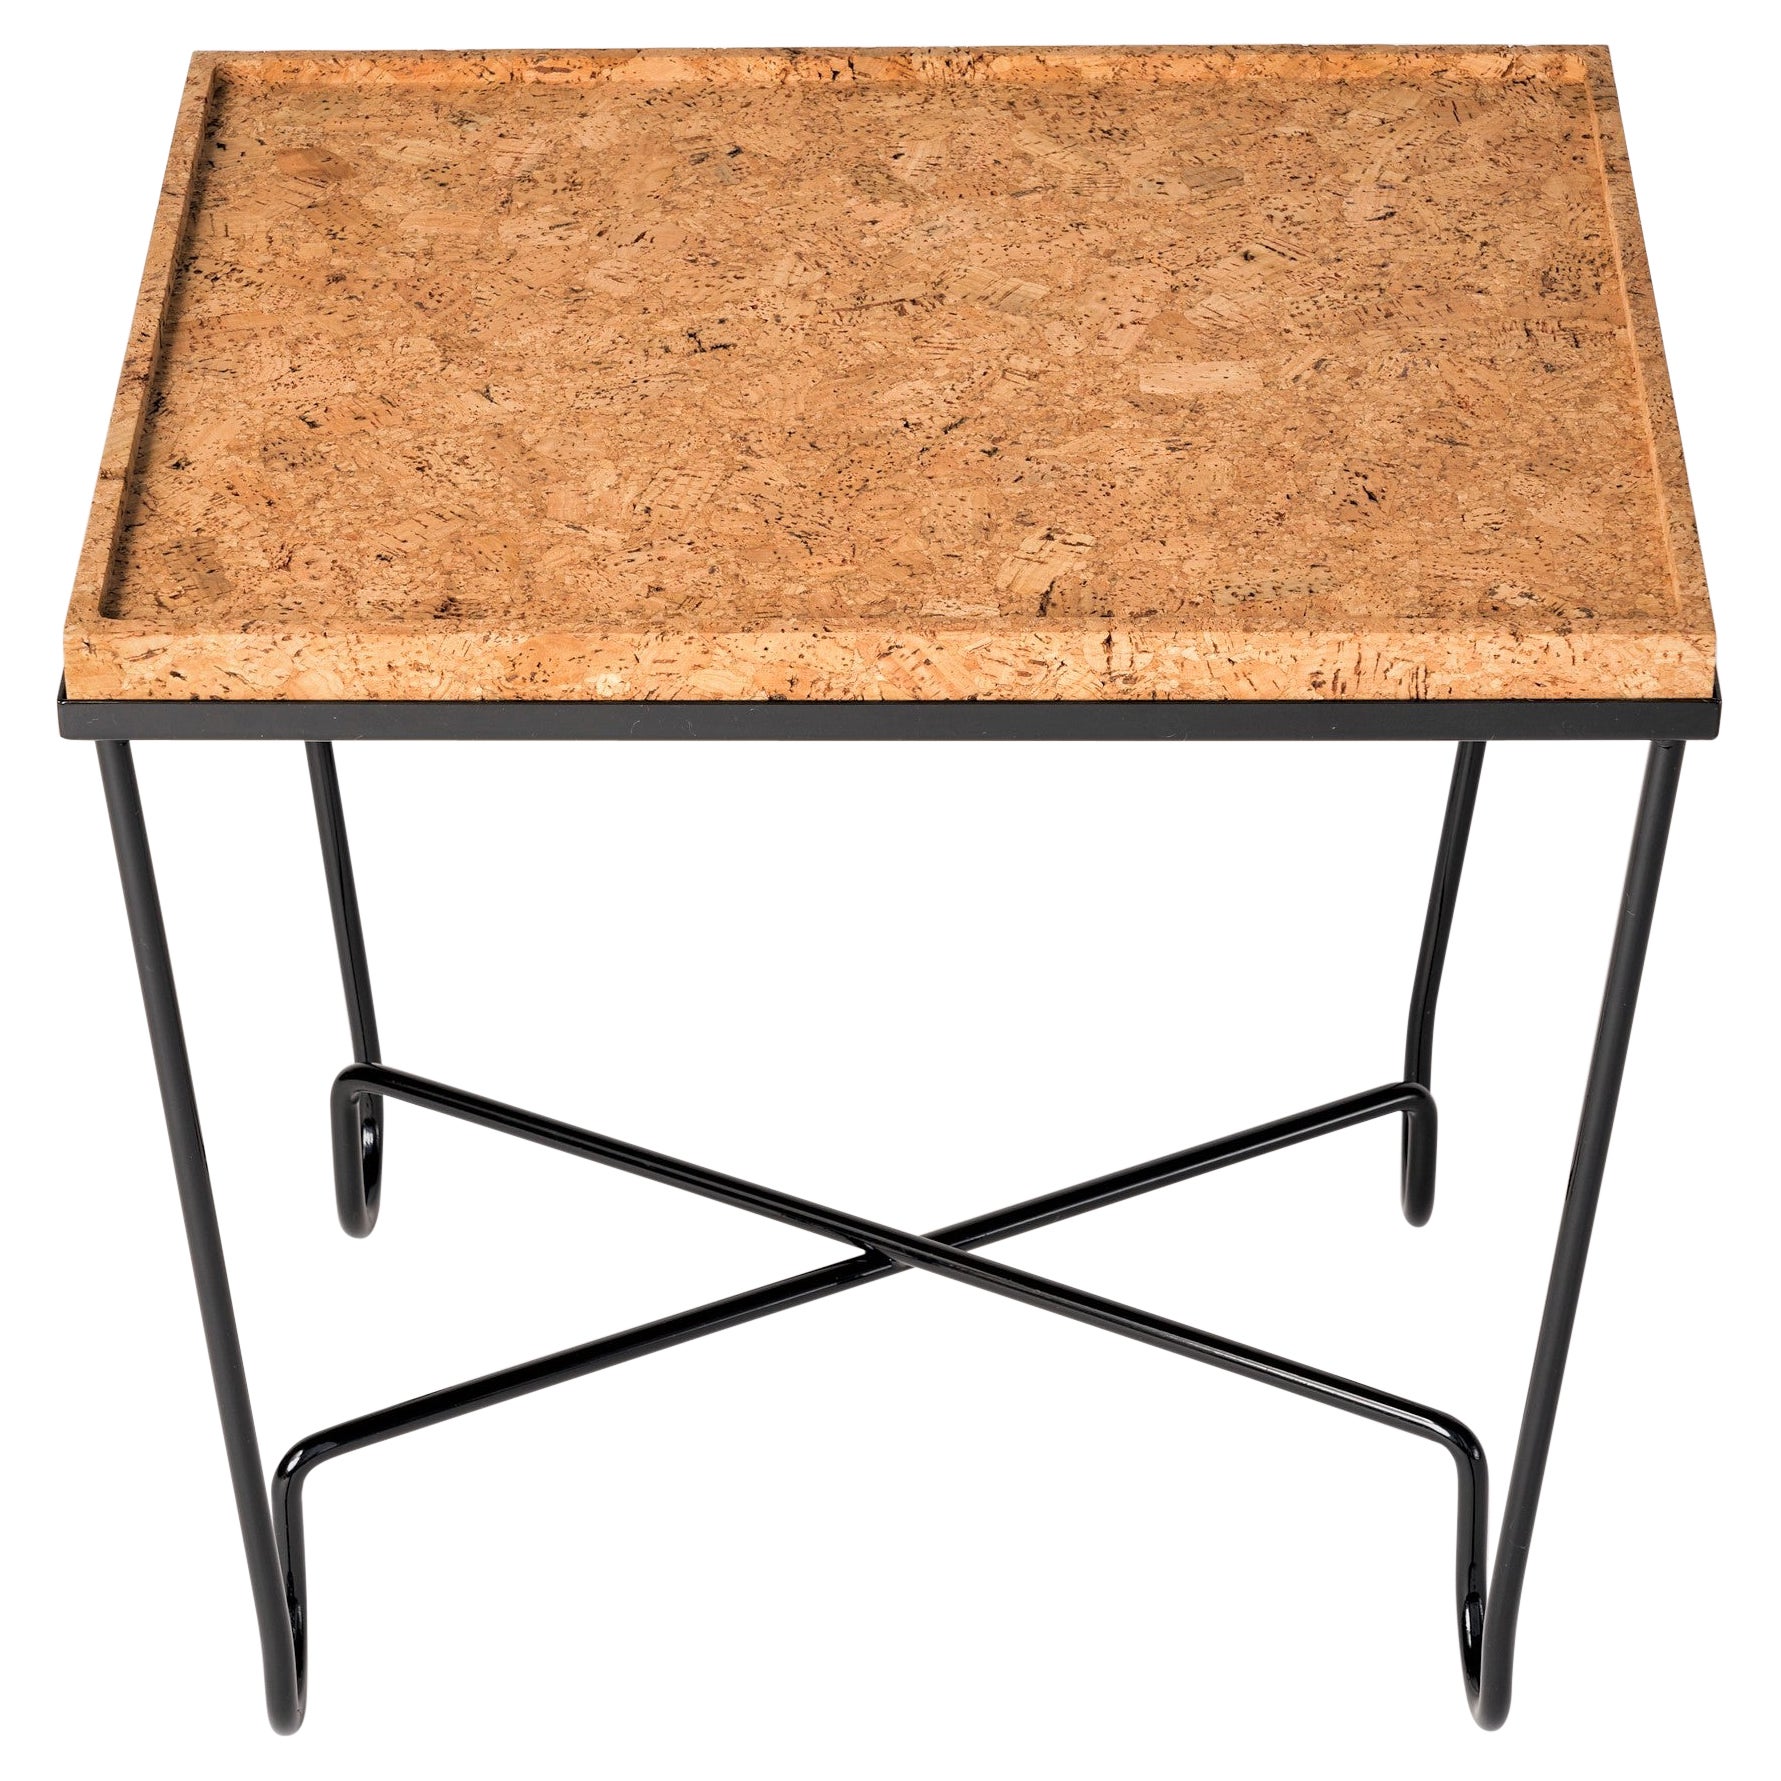 "Aronde" Black Lacquered Steel & Natural Cork Side Table -Facto Atelier Paris For Sale